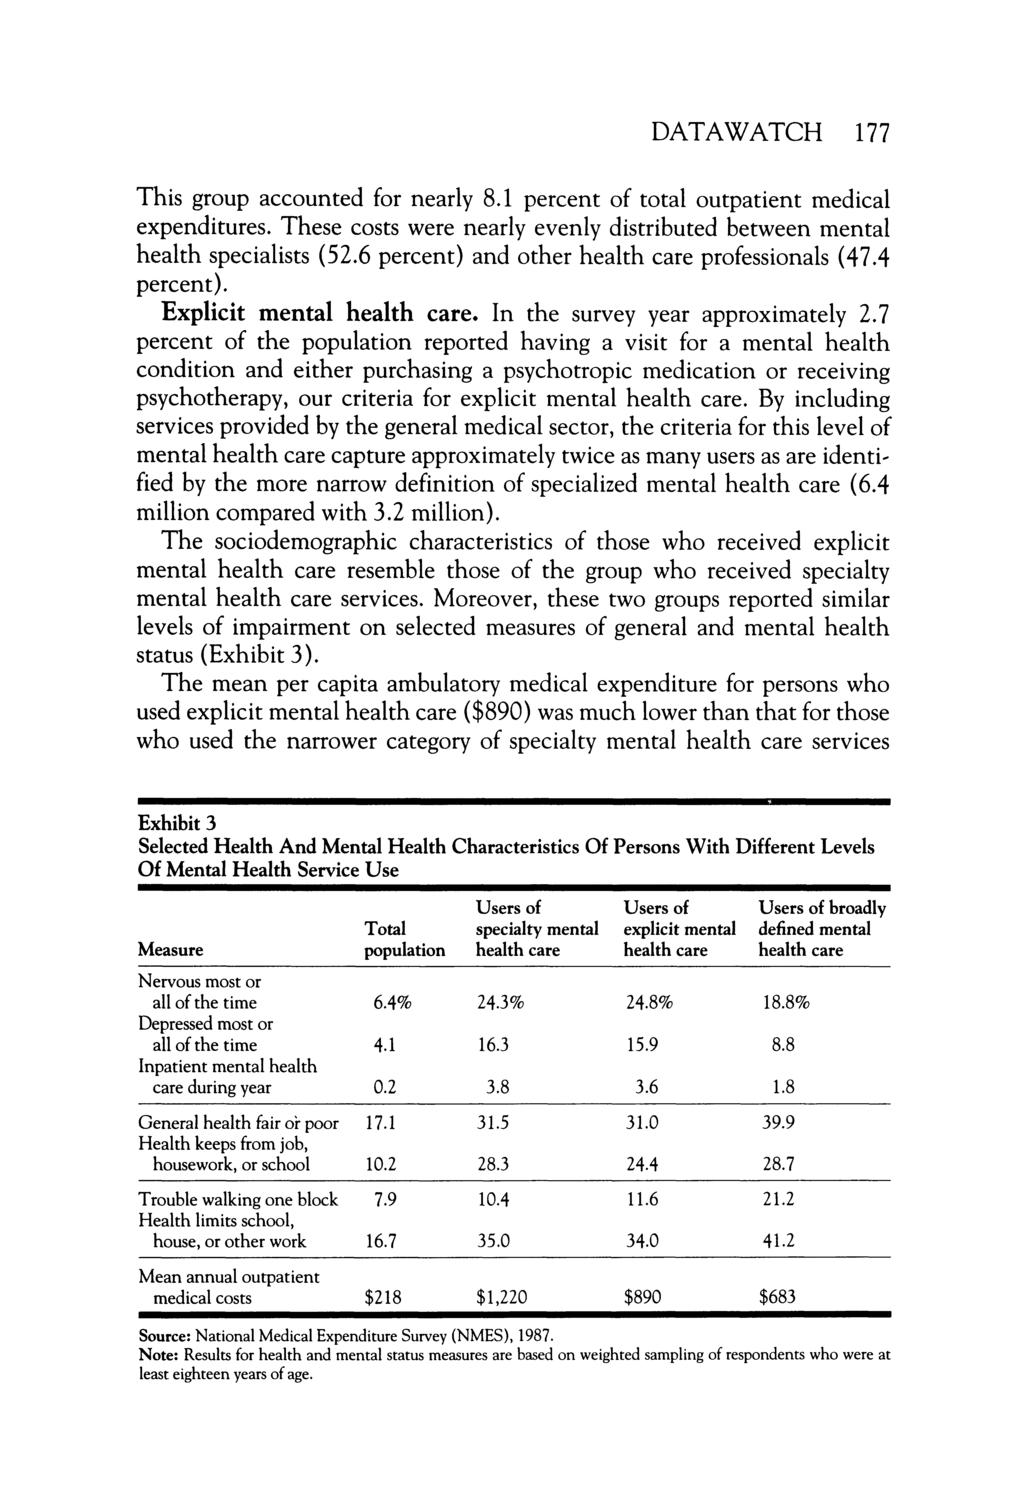 DATAWATCH 177 This group accounted for nearly 8.1 percent of total outpatient medical expenditures. These costs were nearly evenly distributed between mental health specialists (52.